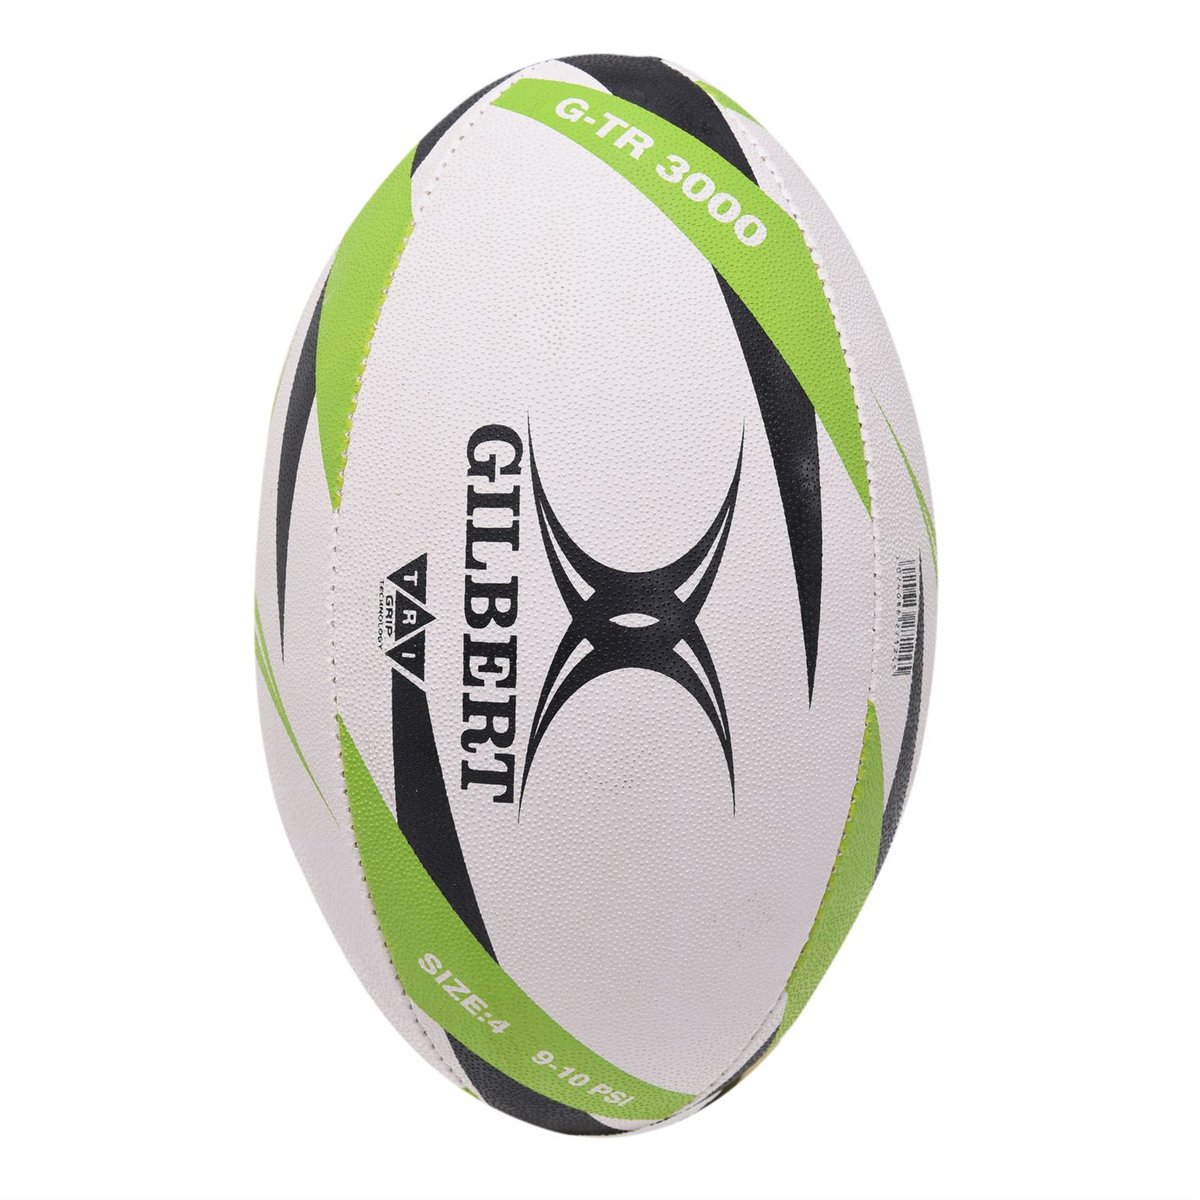 Gilbert G-TR3000 Training Rugby Ball Size 4 Pack of 30 Balls